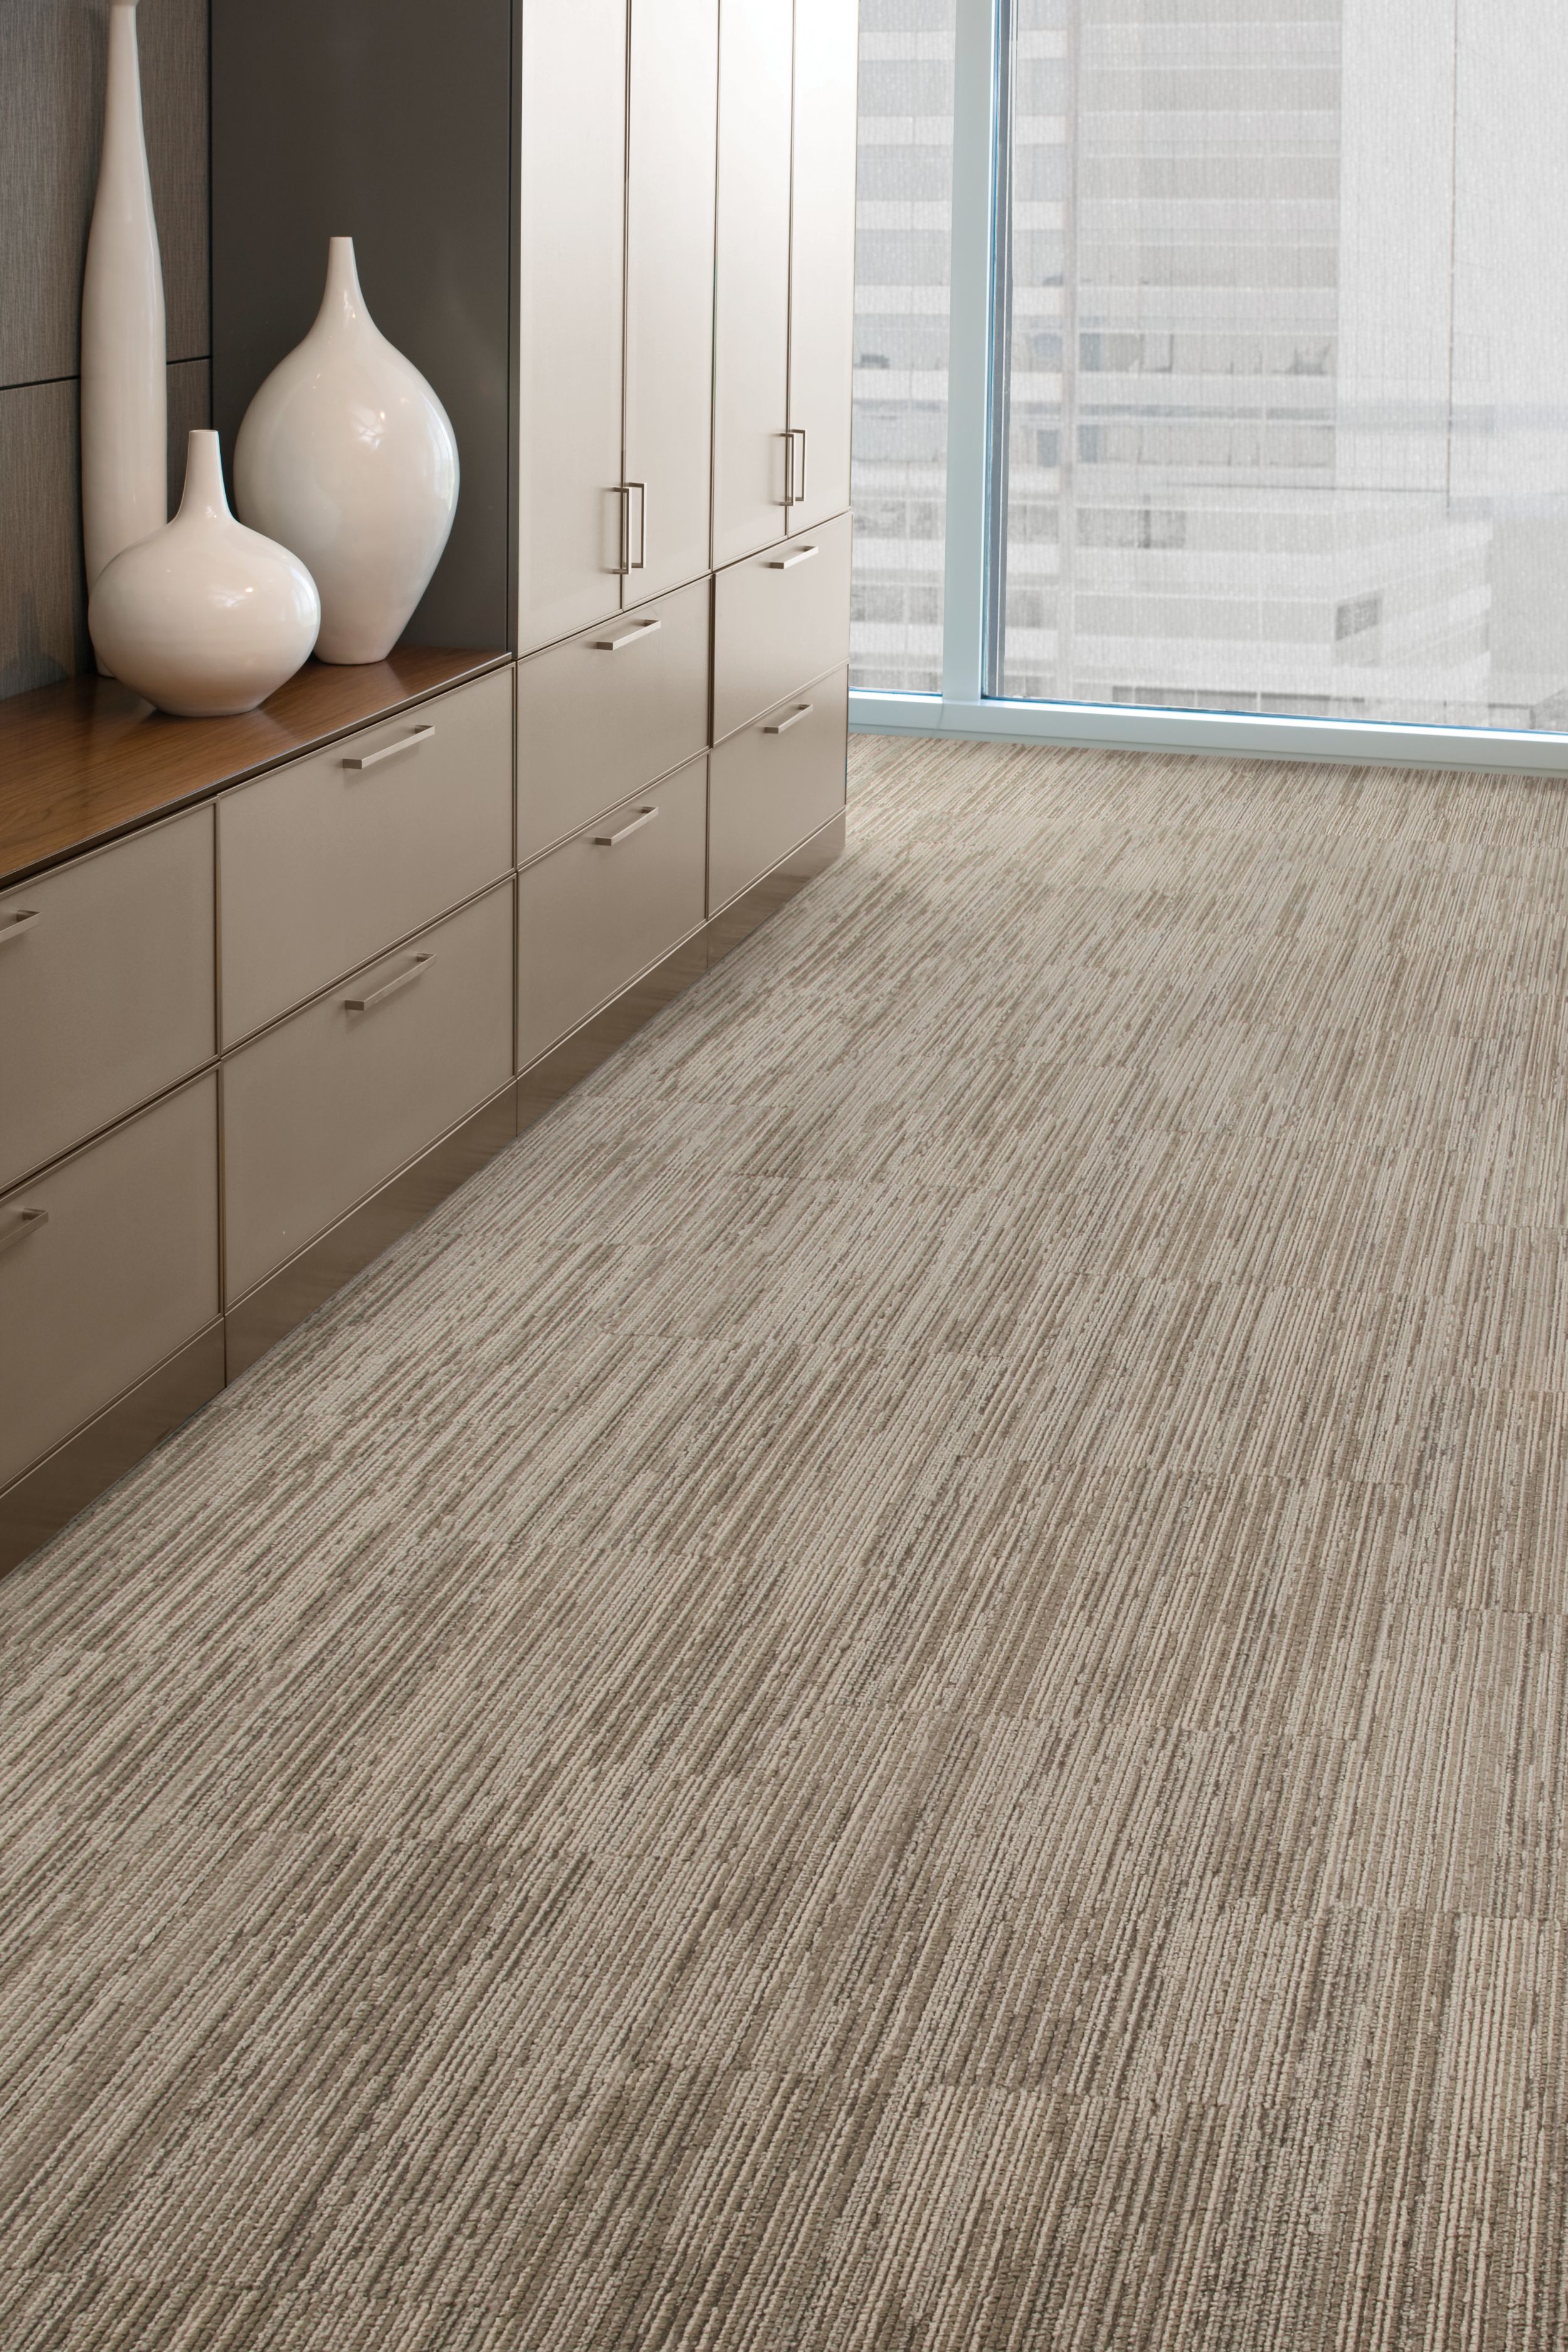 Interface On Board carpet tile in open area with cabinets and white vases numéro d’image 4